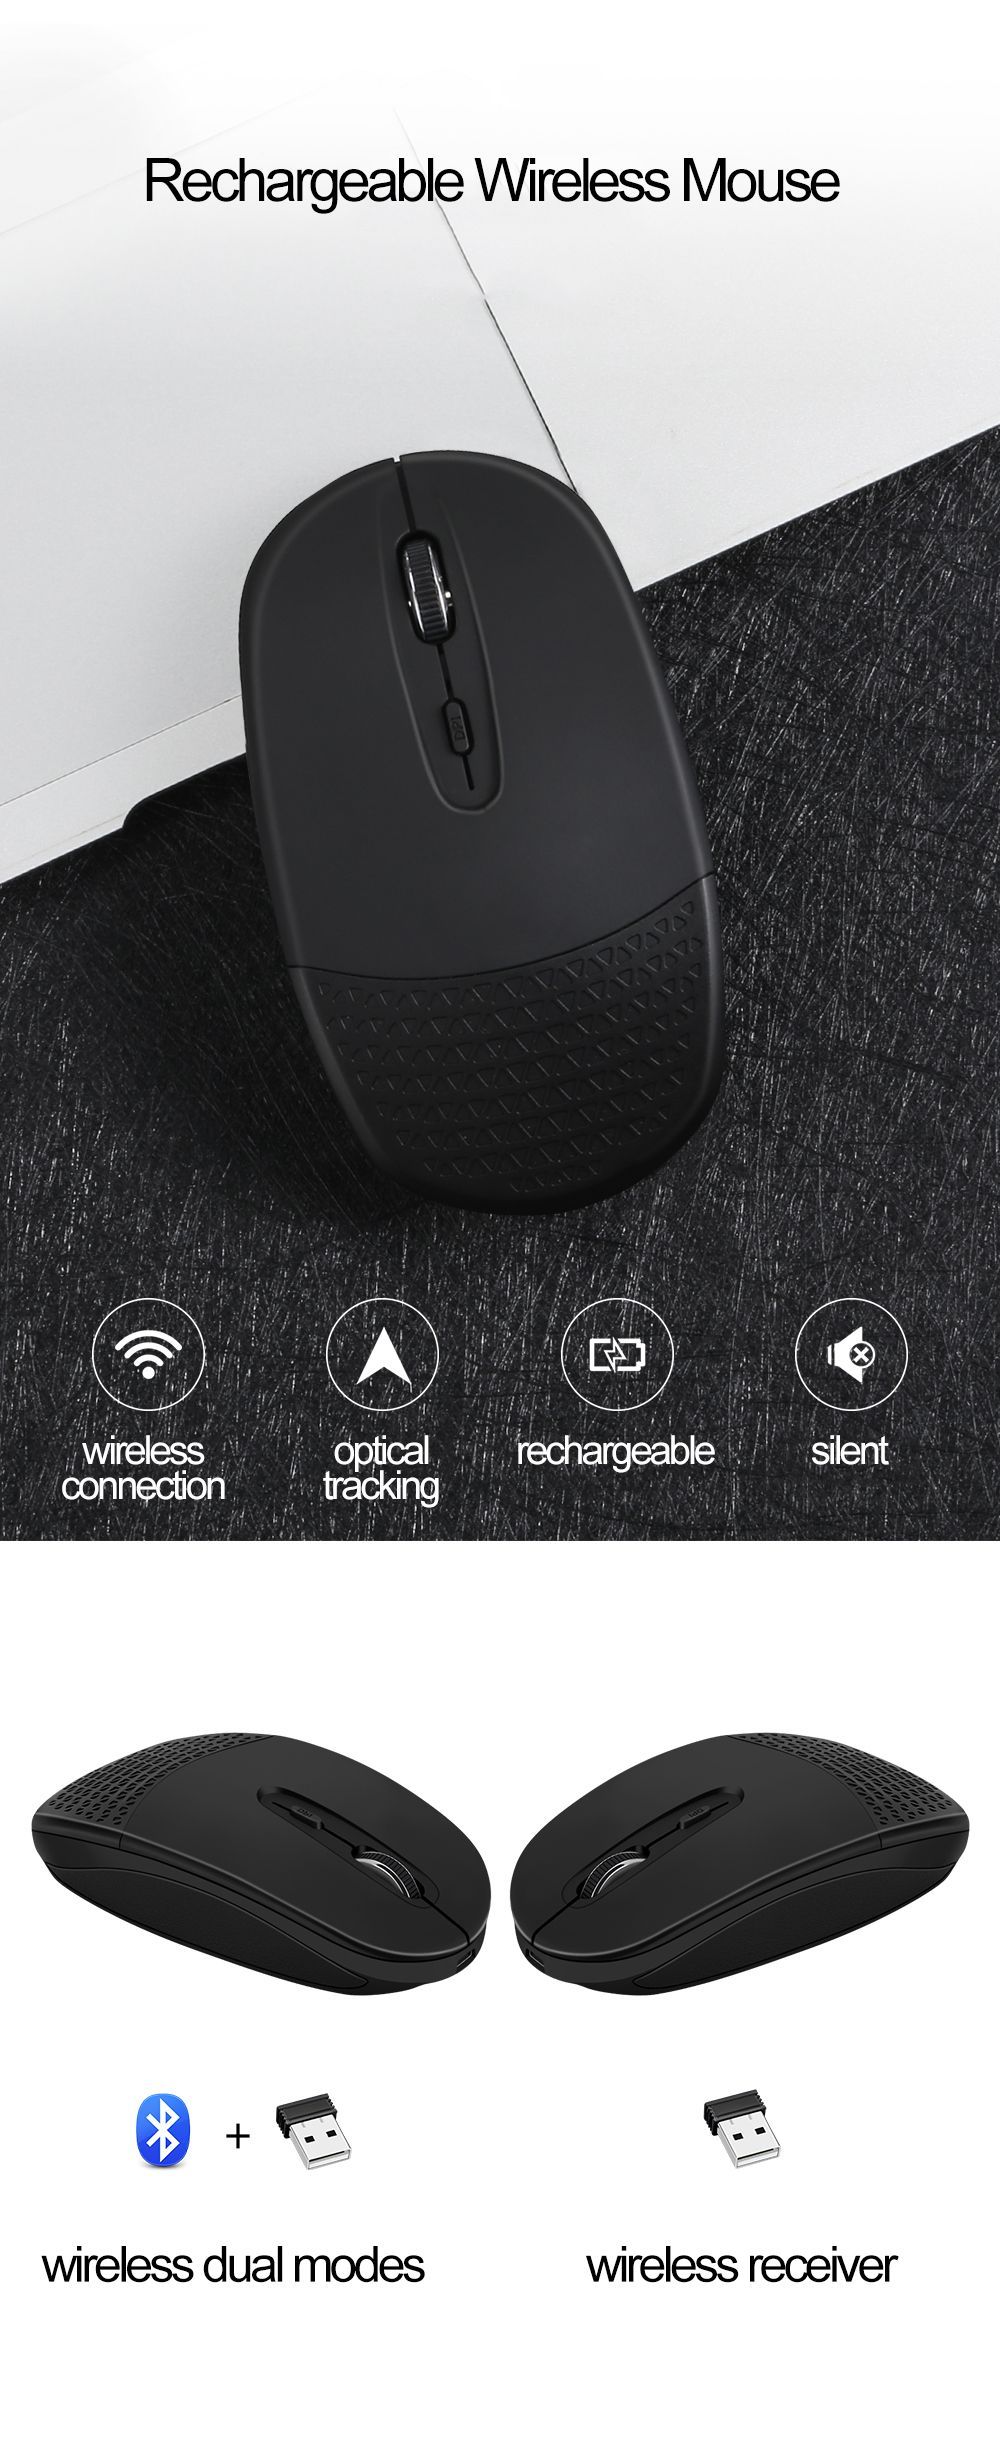 BUBM-WXSB-F-Rechargeable-Wireless-Mouse-24GHz-Gaming-Optical-Mice-Office-Mouse-with-USB-Receiver-For-1622164